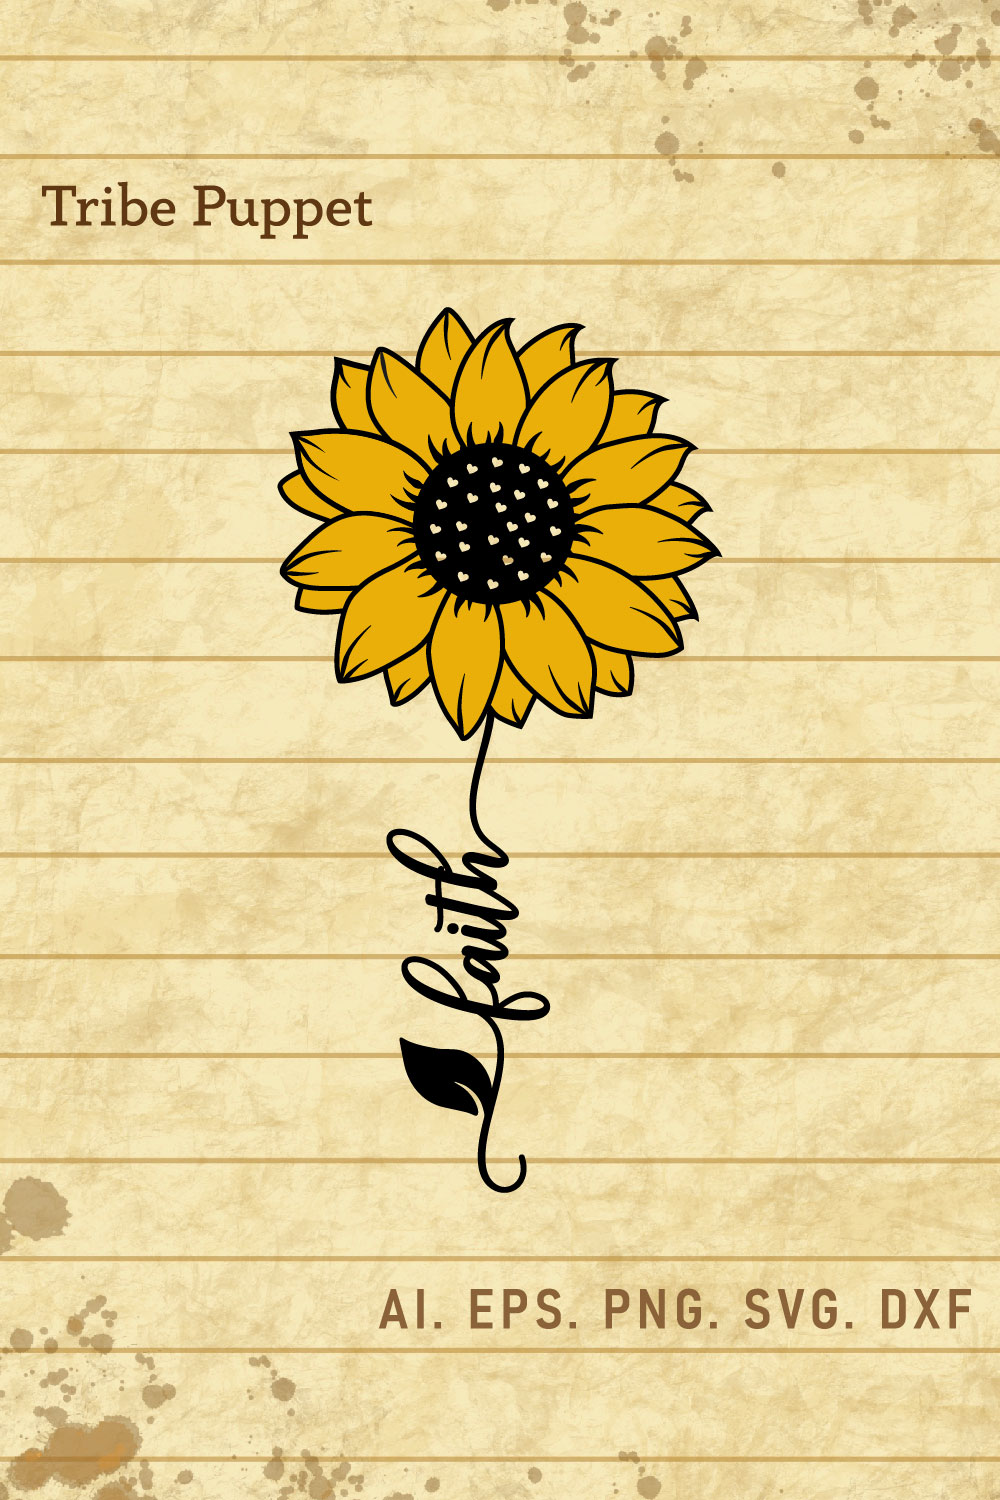 Sunflower 02 pinterest preview image.